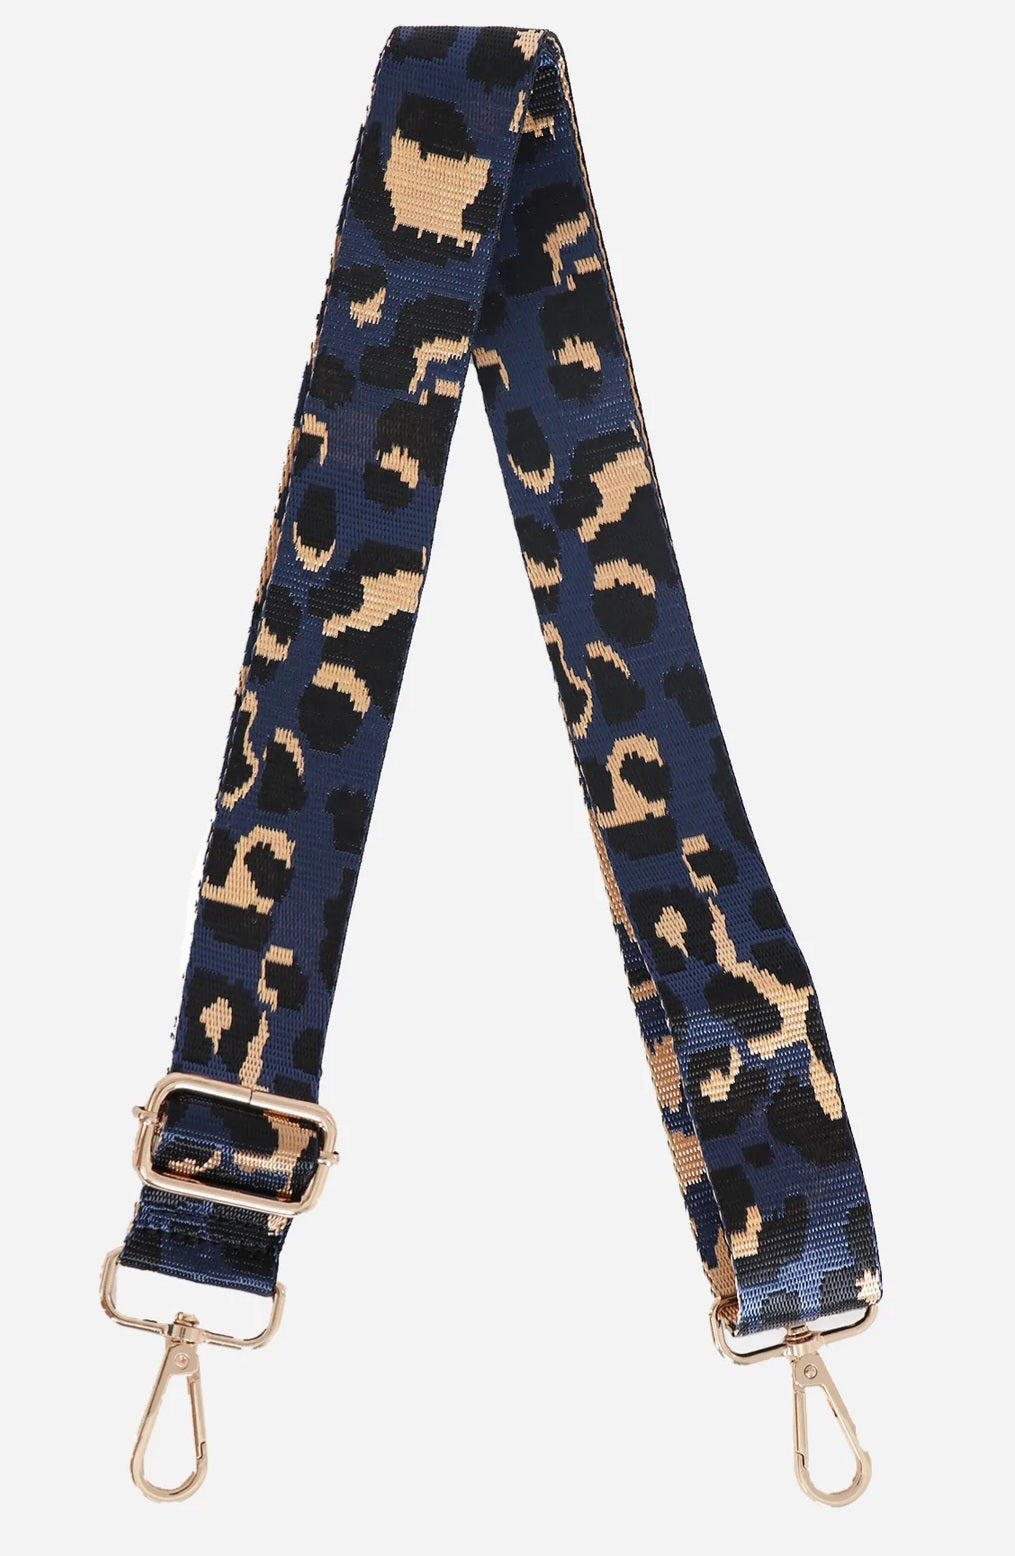 Navy blue and gold leopard print strap